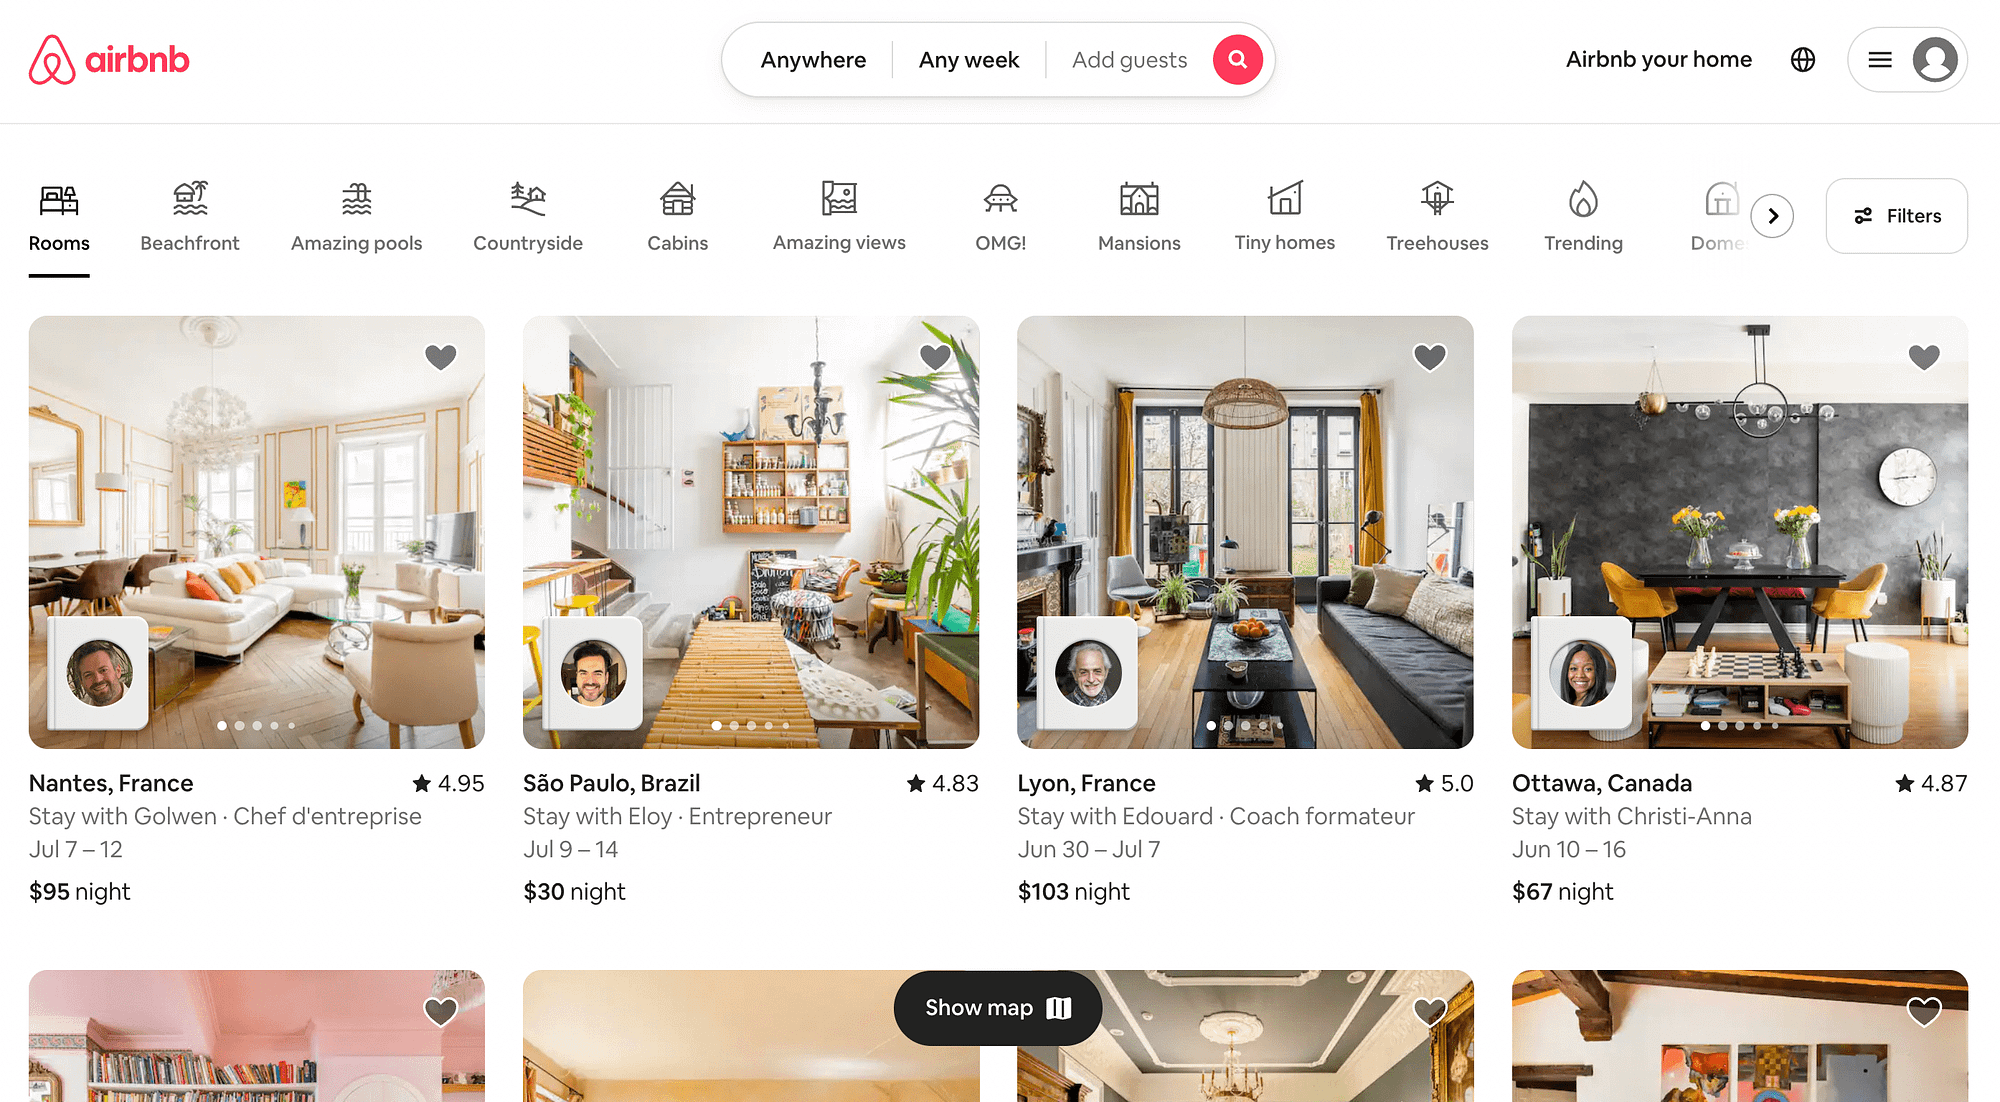 The airbnb website.